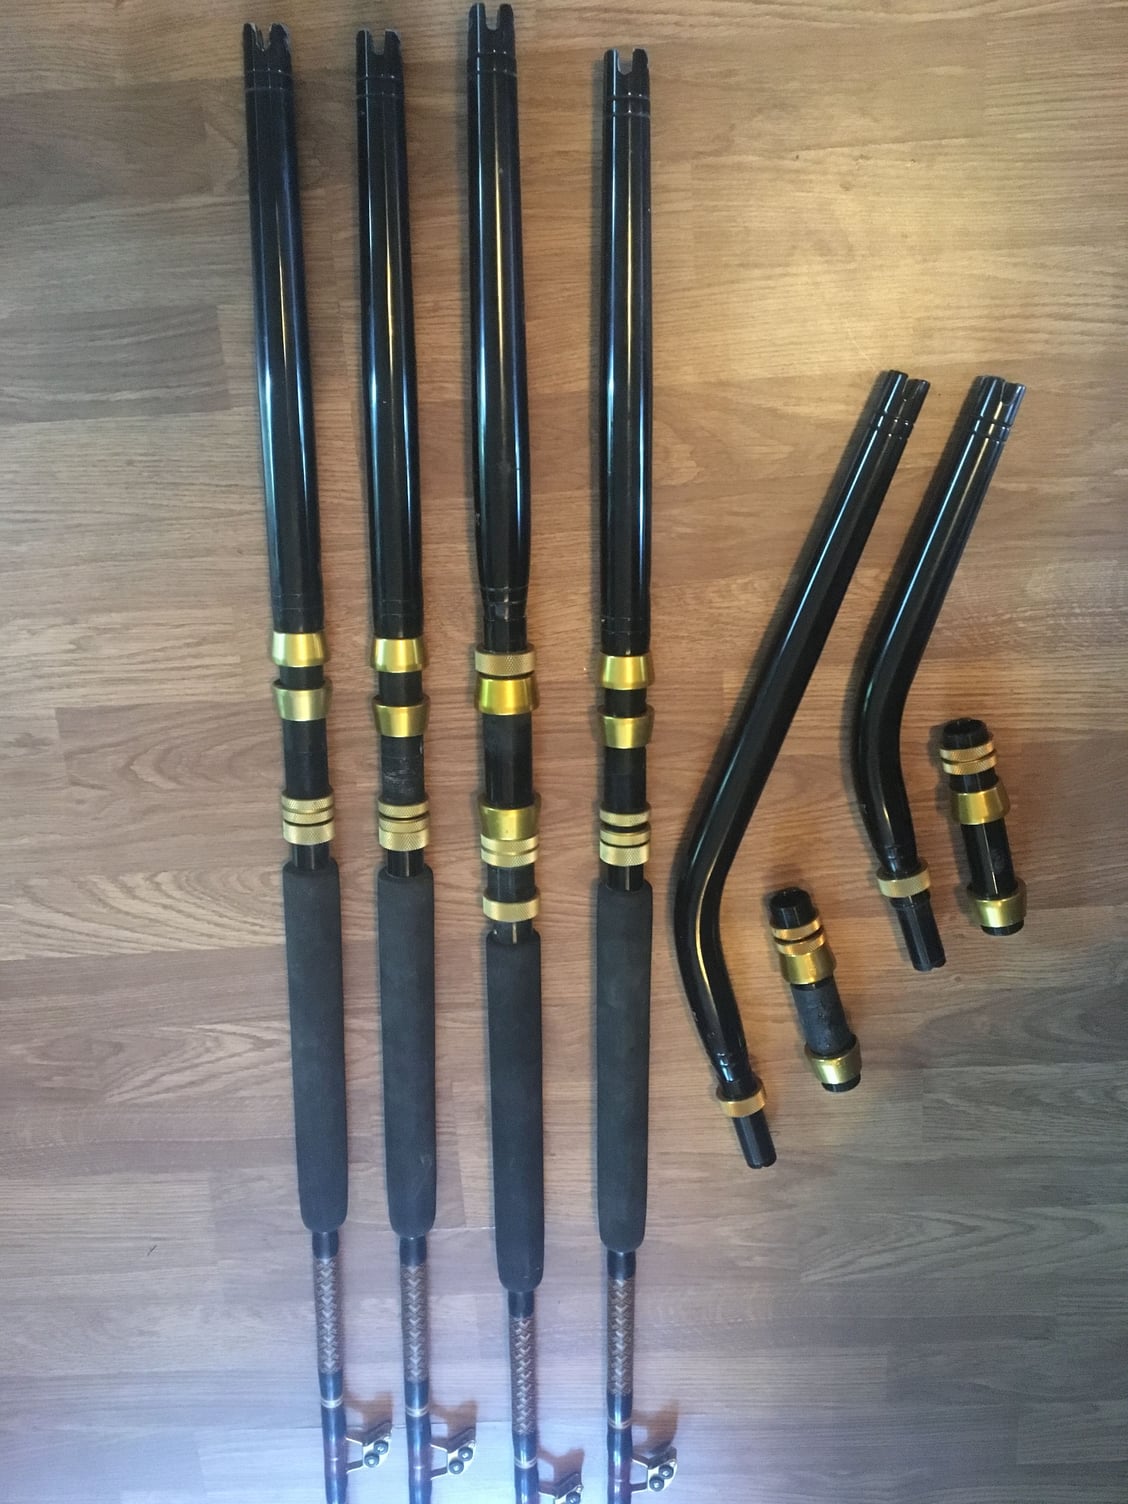 J&M rod bent and straight butts, 4 Chaos Rods, Aftco storabutt